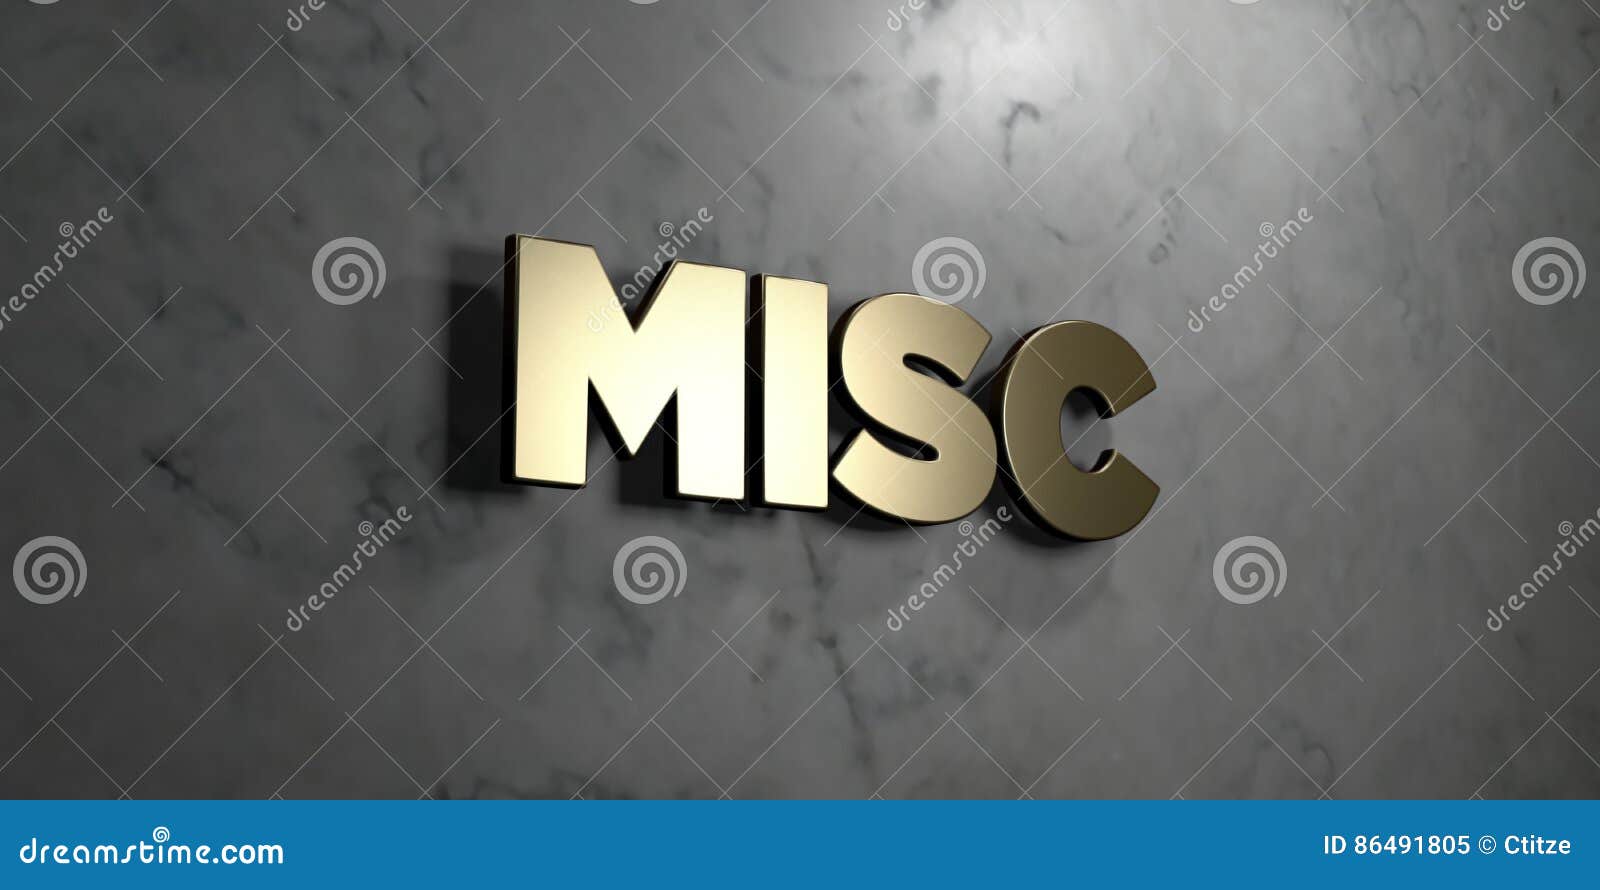 misc - gold sign mounted on glossy marble wall - 3d rendered royalty free stock 